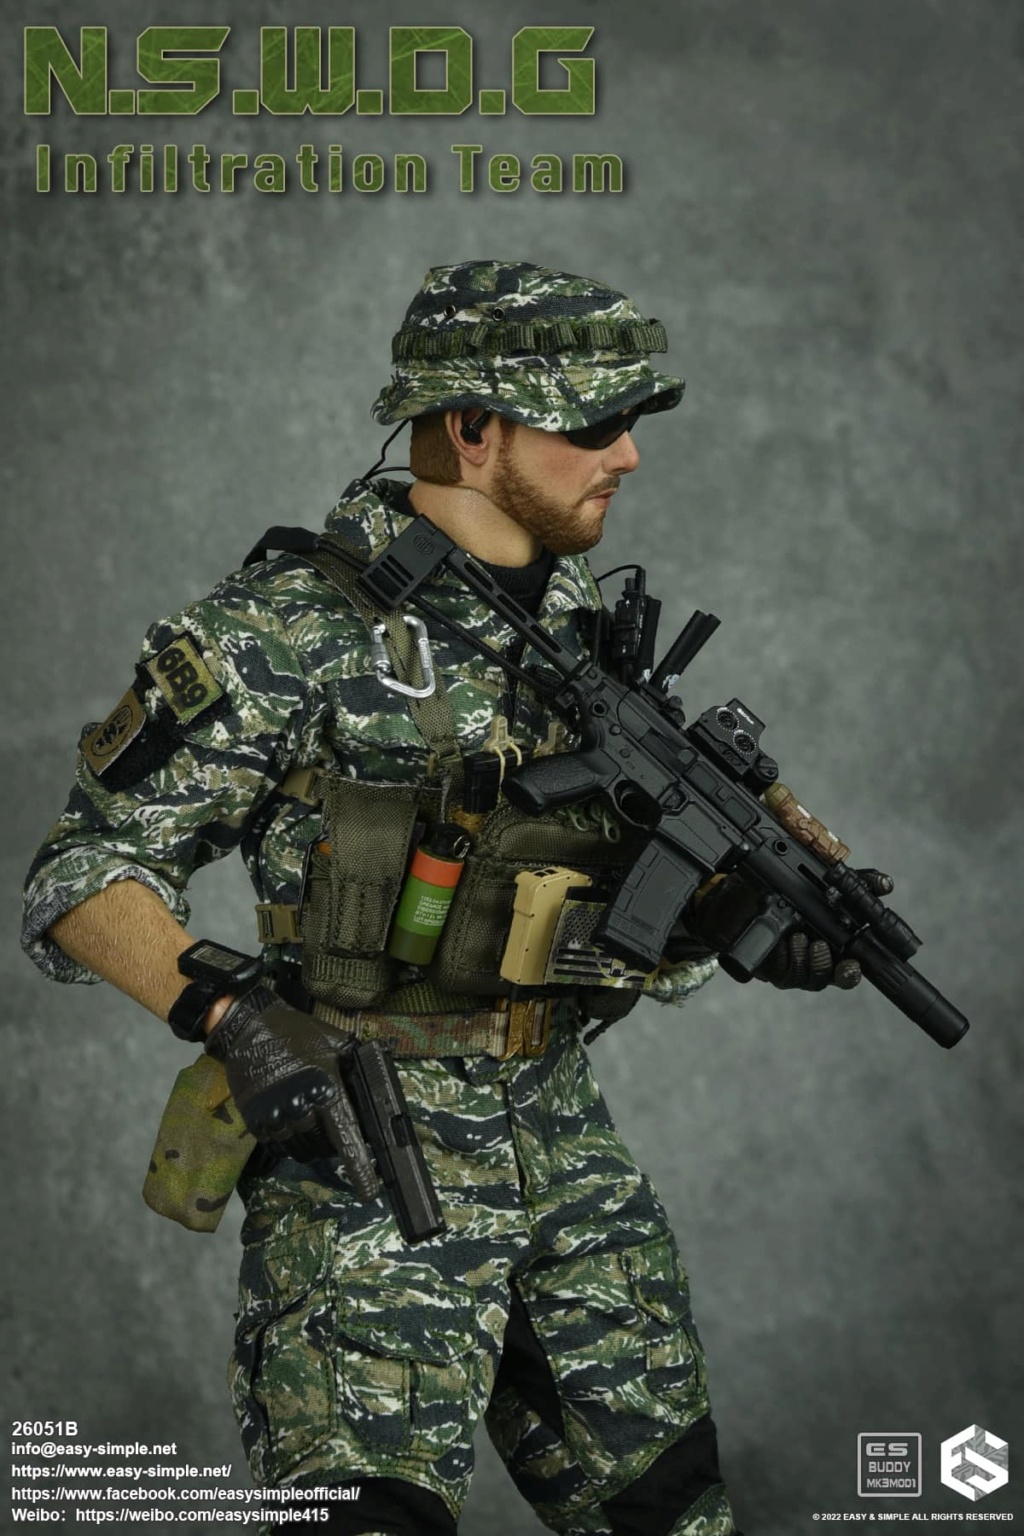 ModernMilitary - NEW PRODUCT: EASY AND SIMPLE 1/6 SCALE FIGURE: N.S.W.D.G INFILTRATION TEAM - (2 Versions) 10530